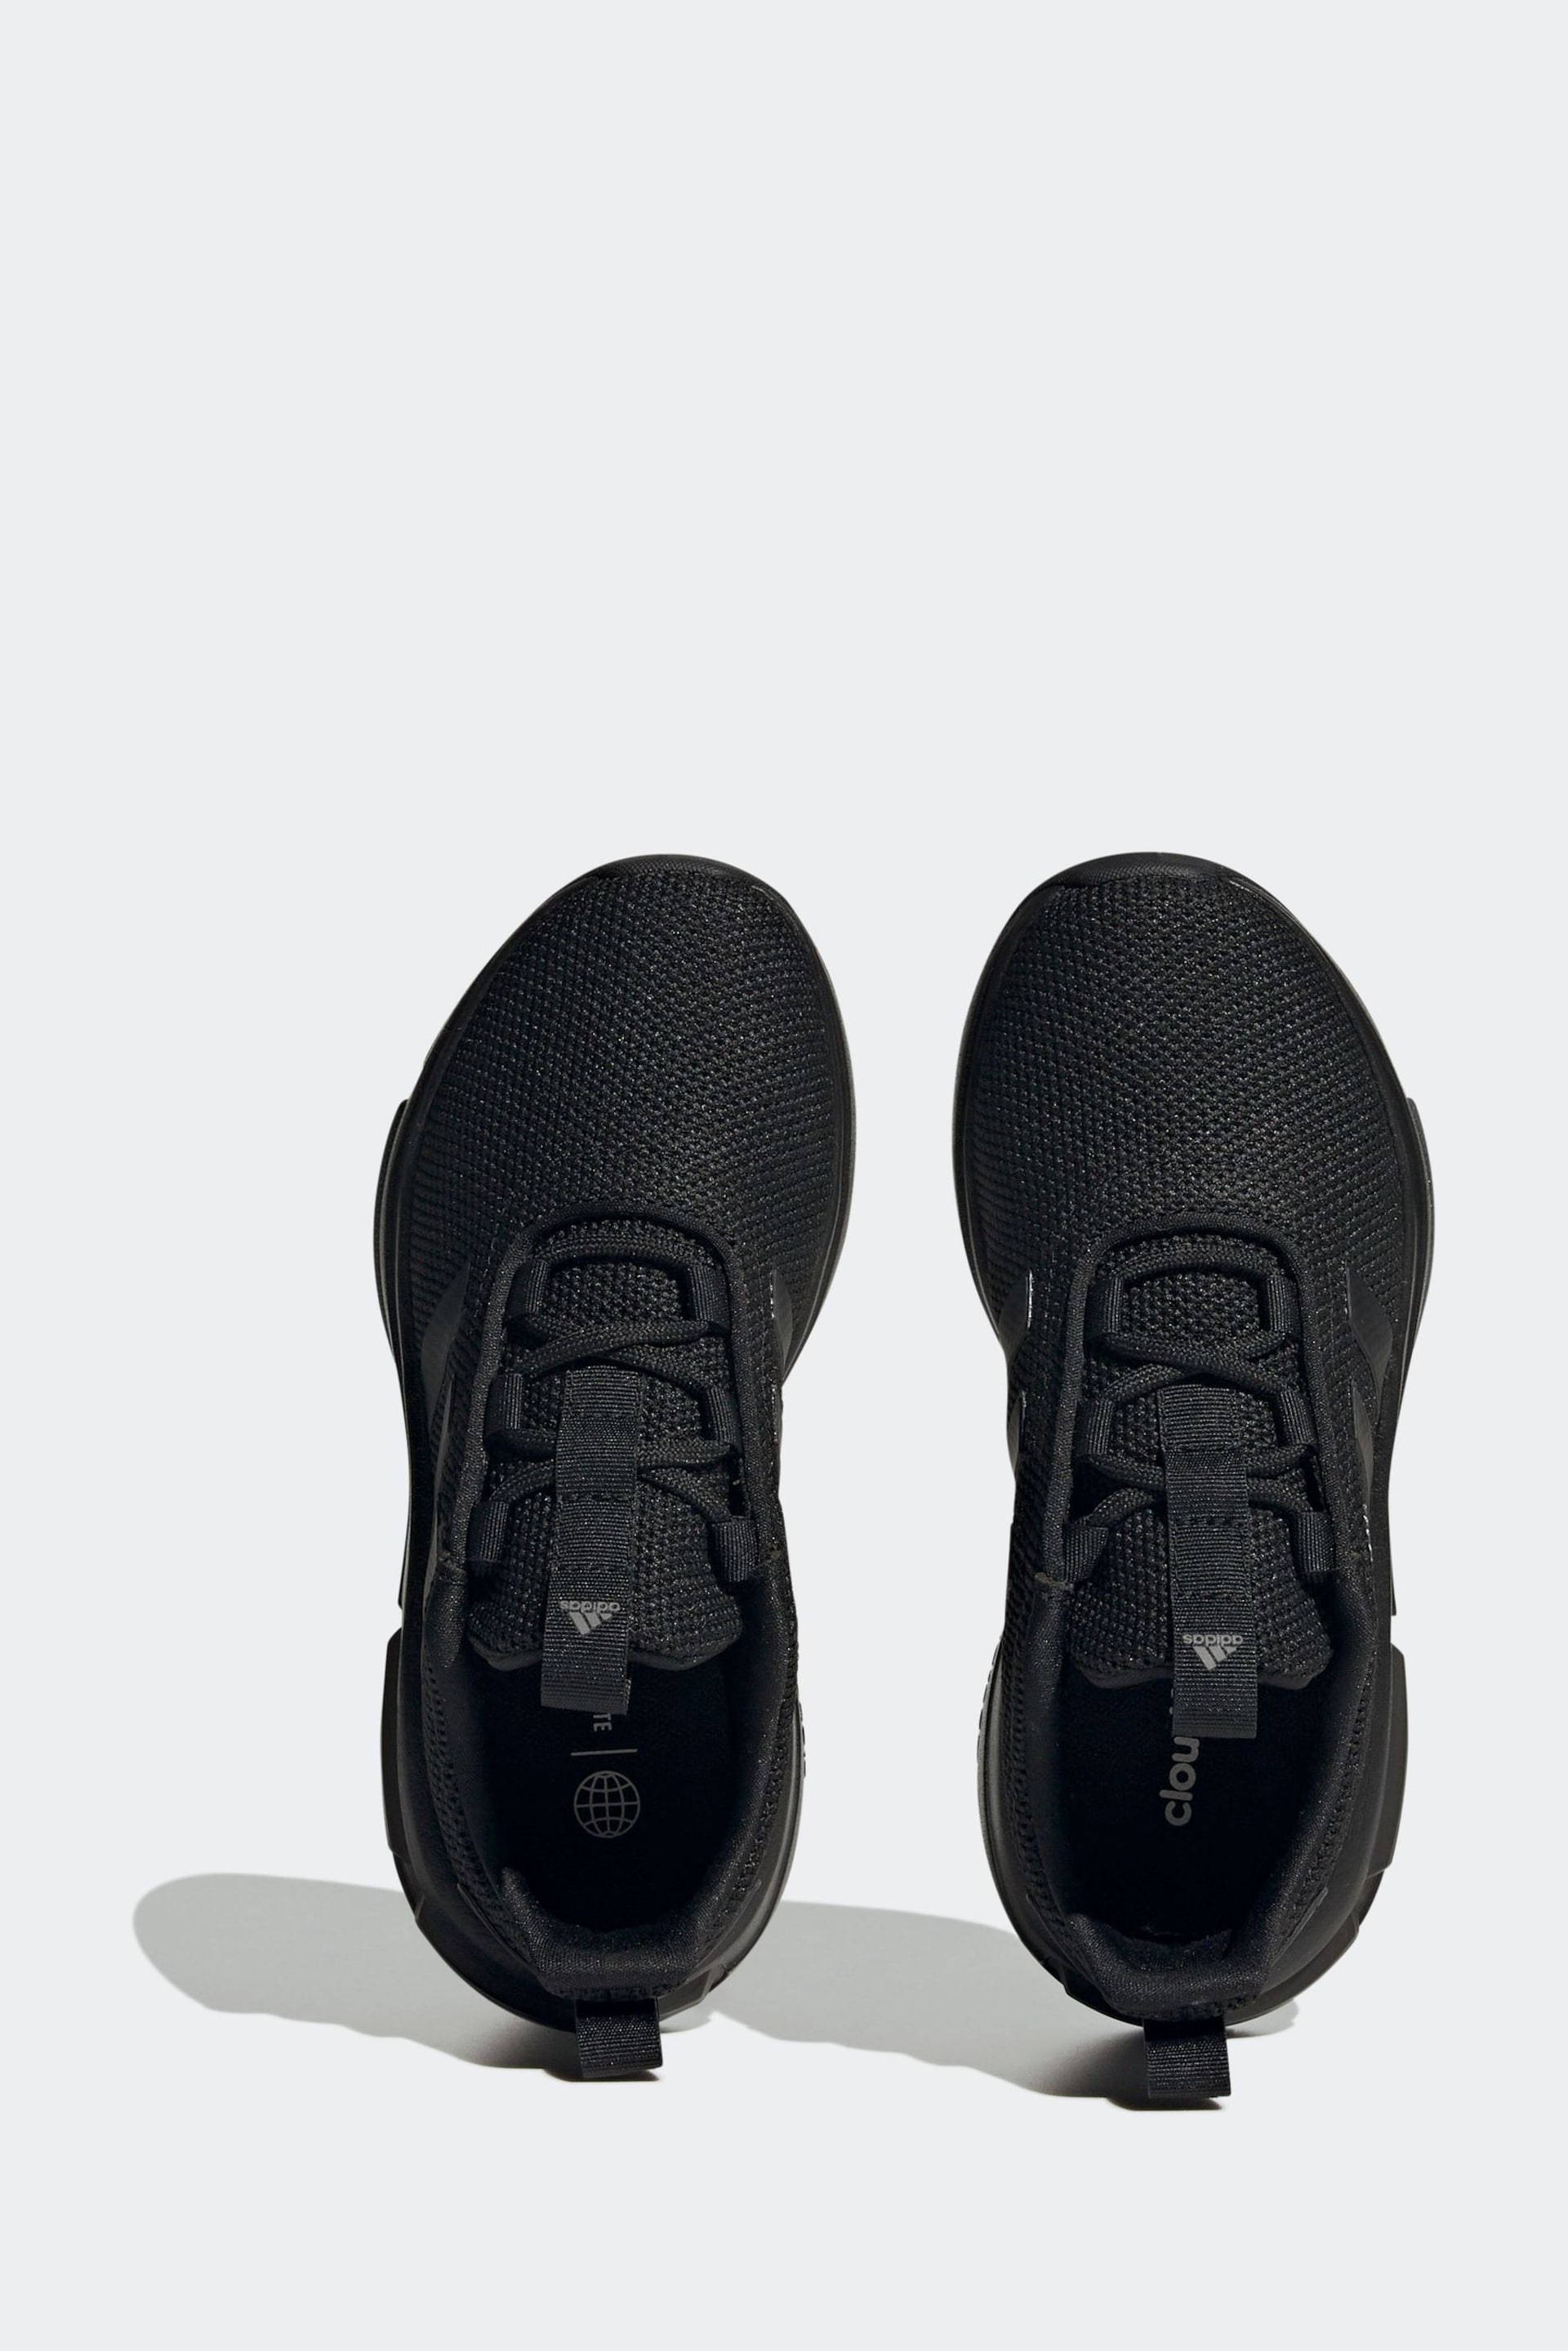 adidas Black Kids Racer TR23 Shoes - Image 5 of 8